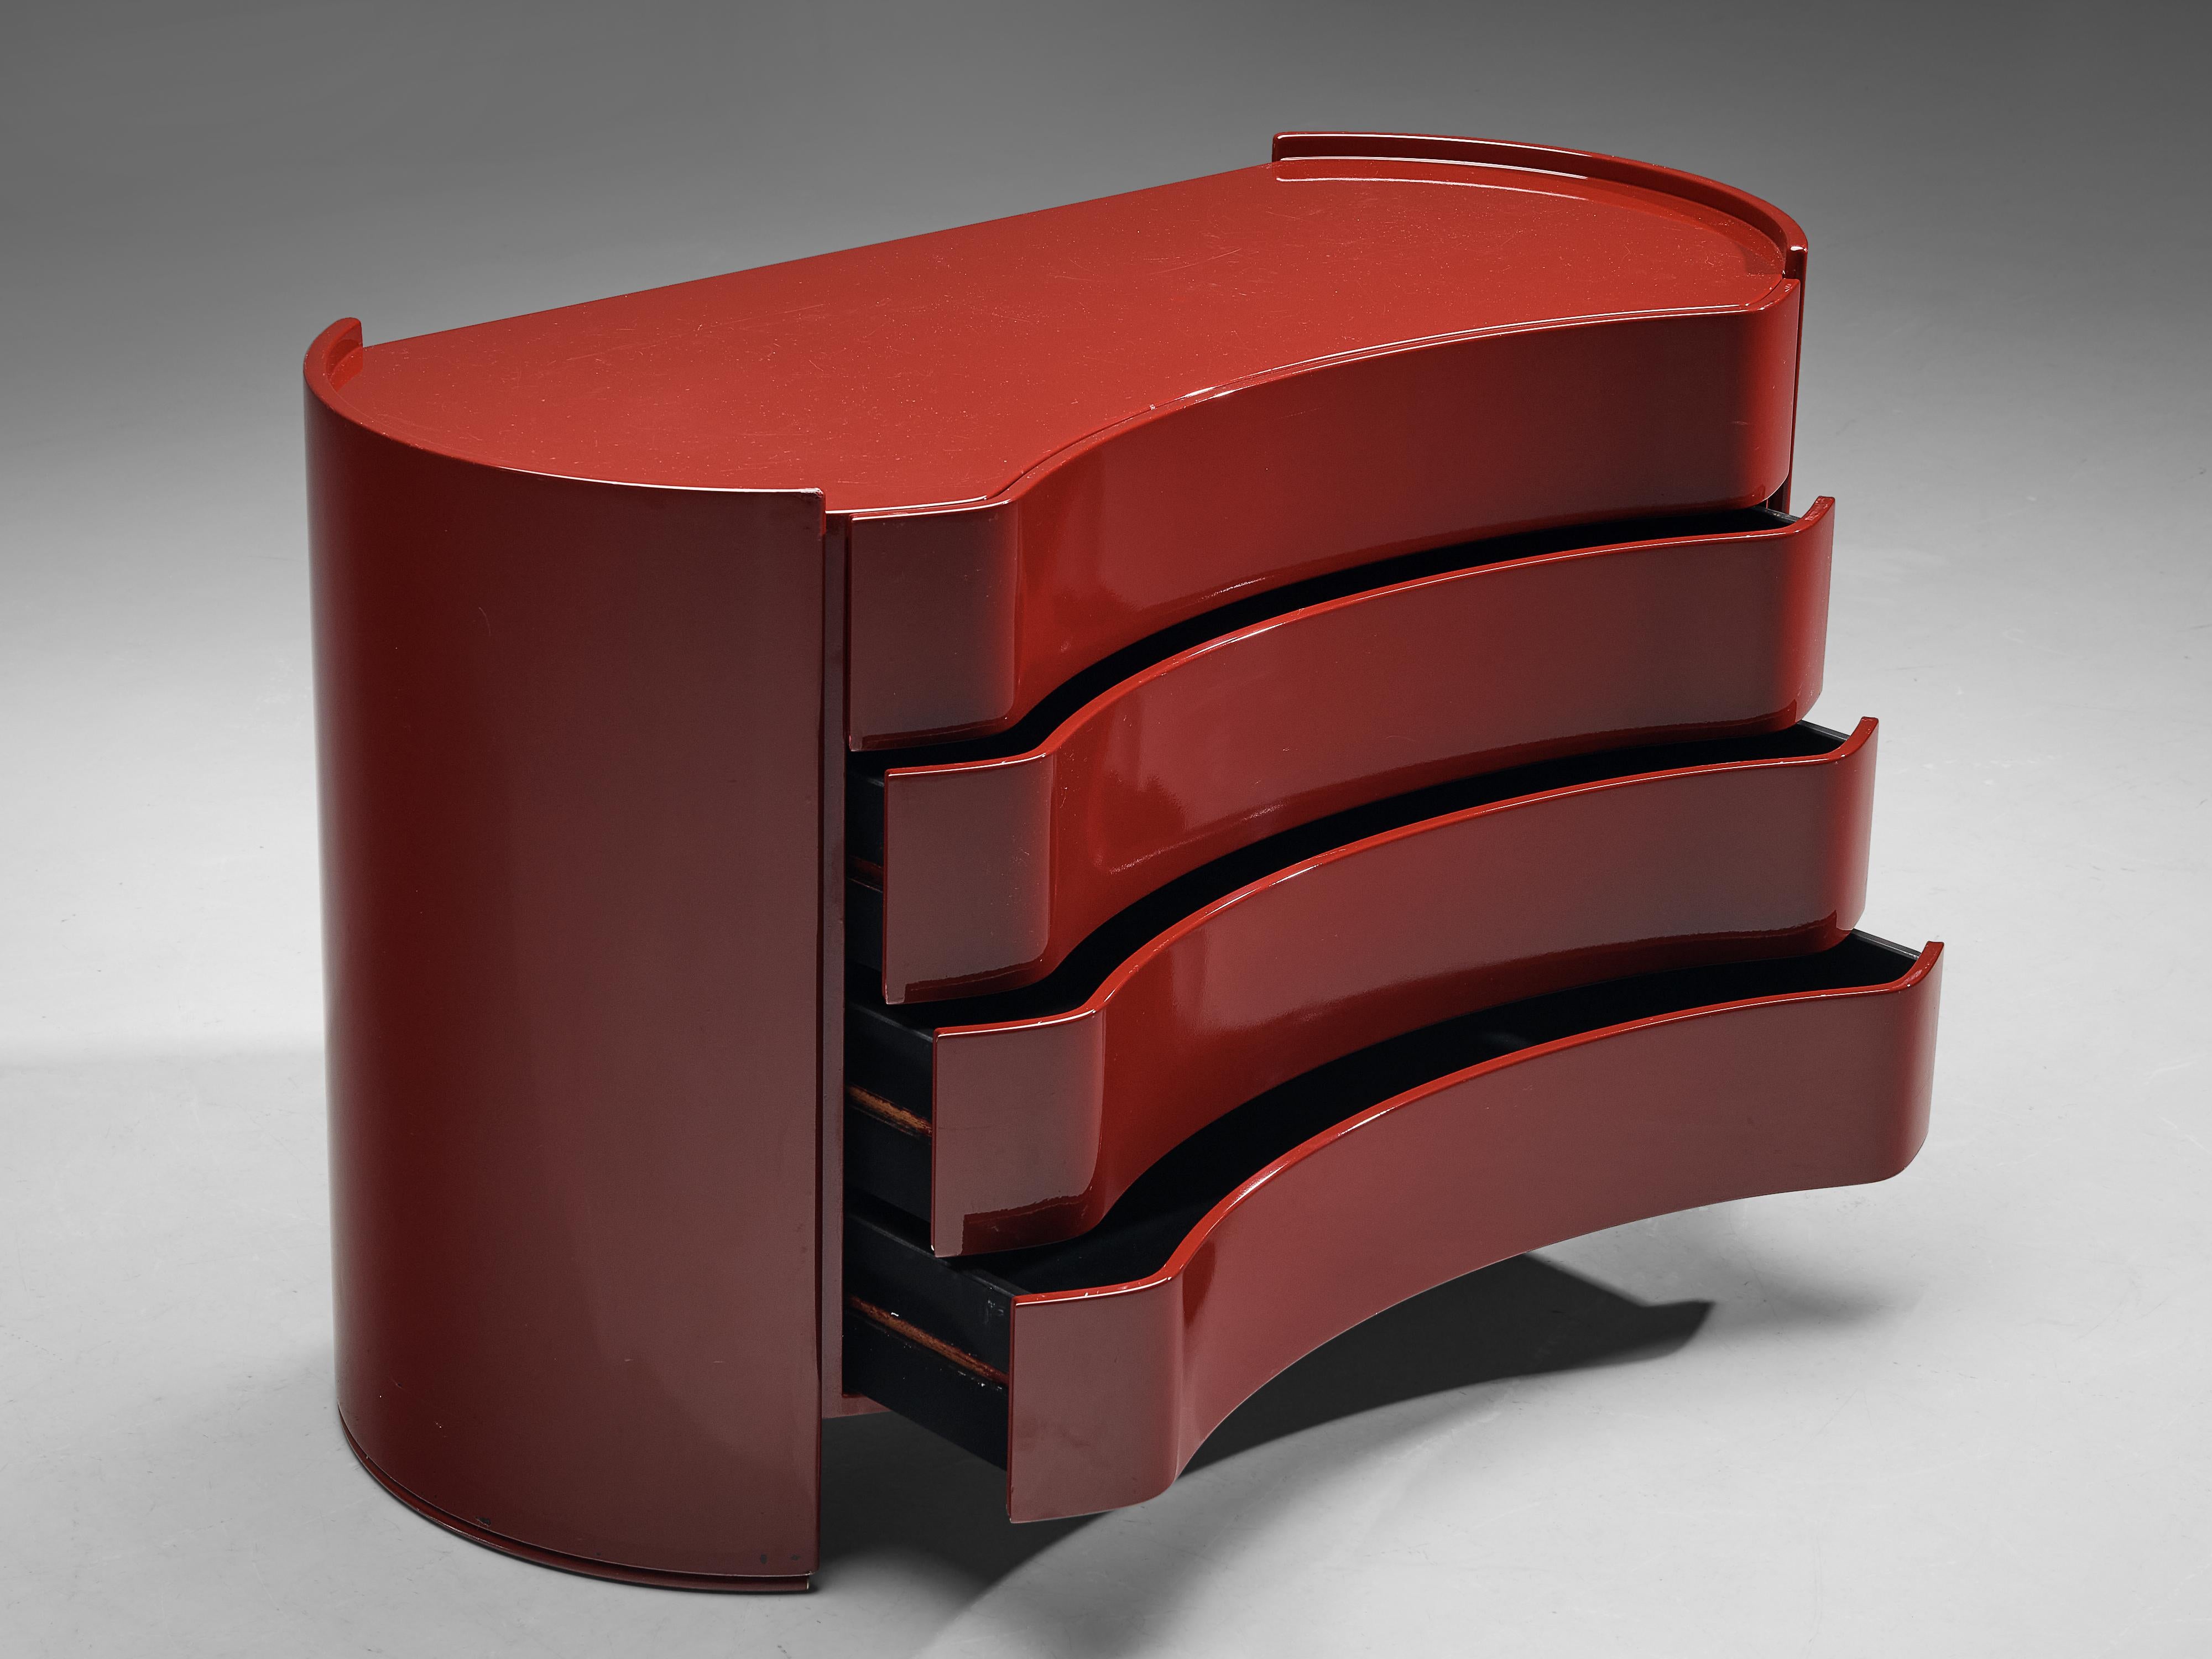 Curved Italian 'Aiace' Chest of Drawers in Red Lacquered Wood by Benatti 1